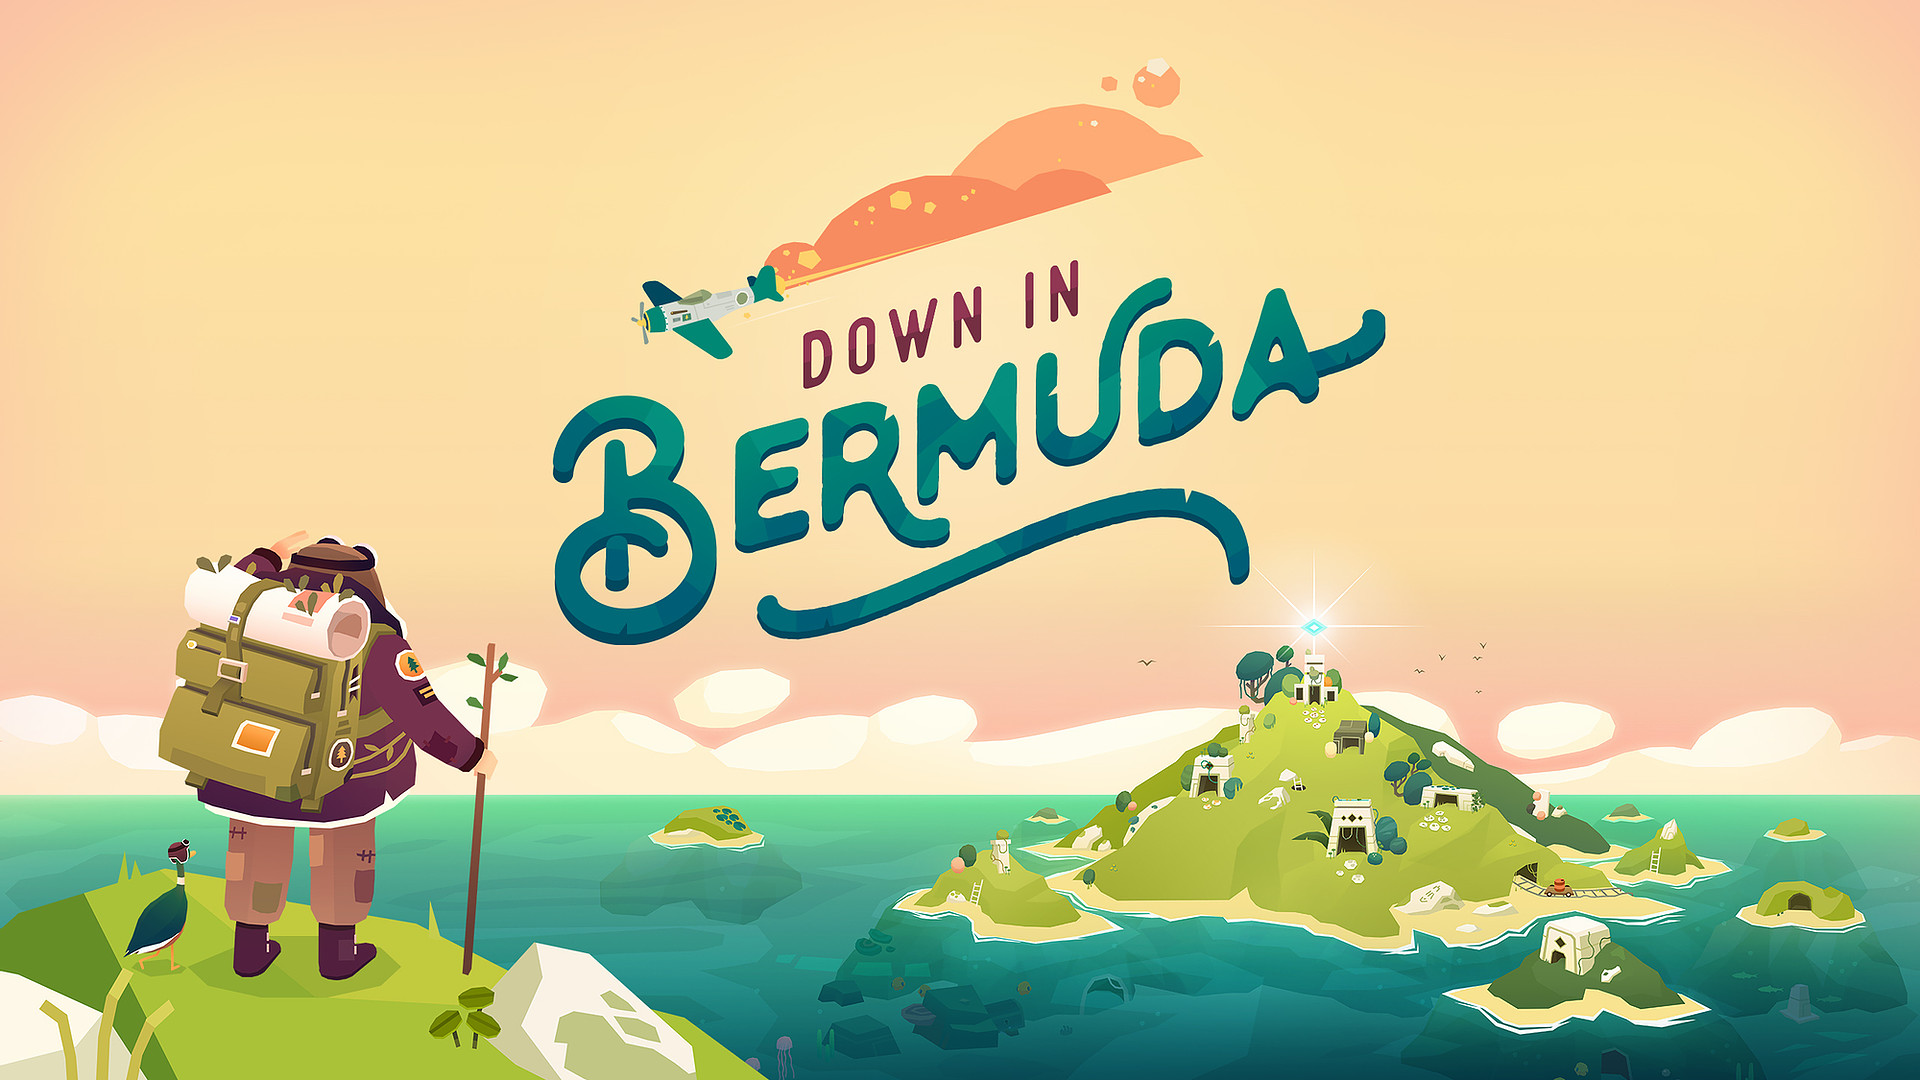 down in bermuda....by the denning sisters